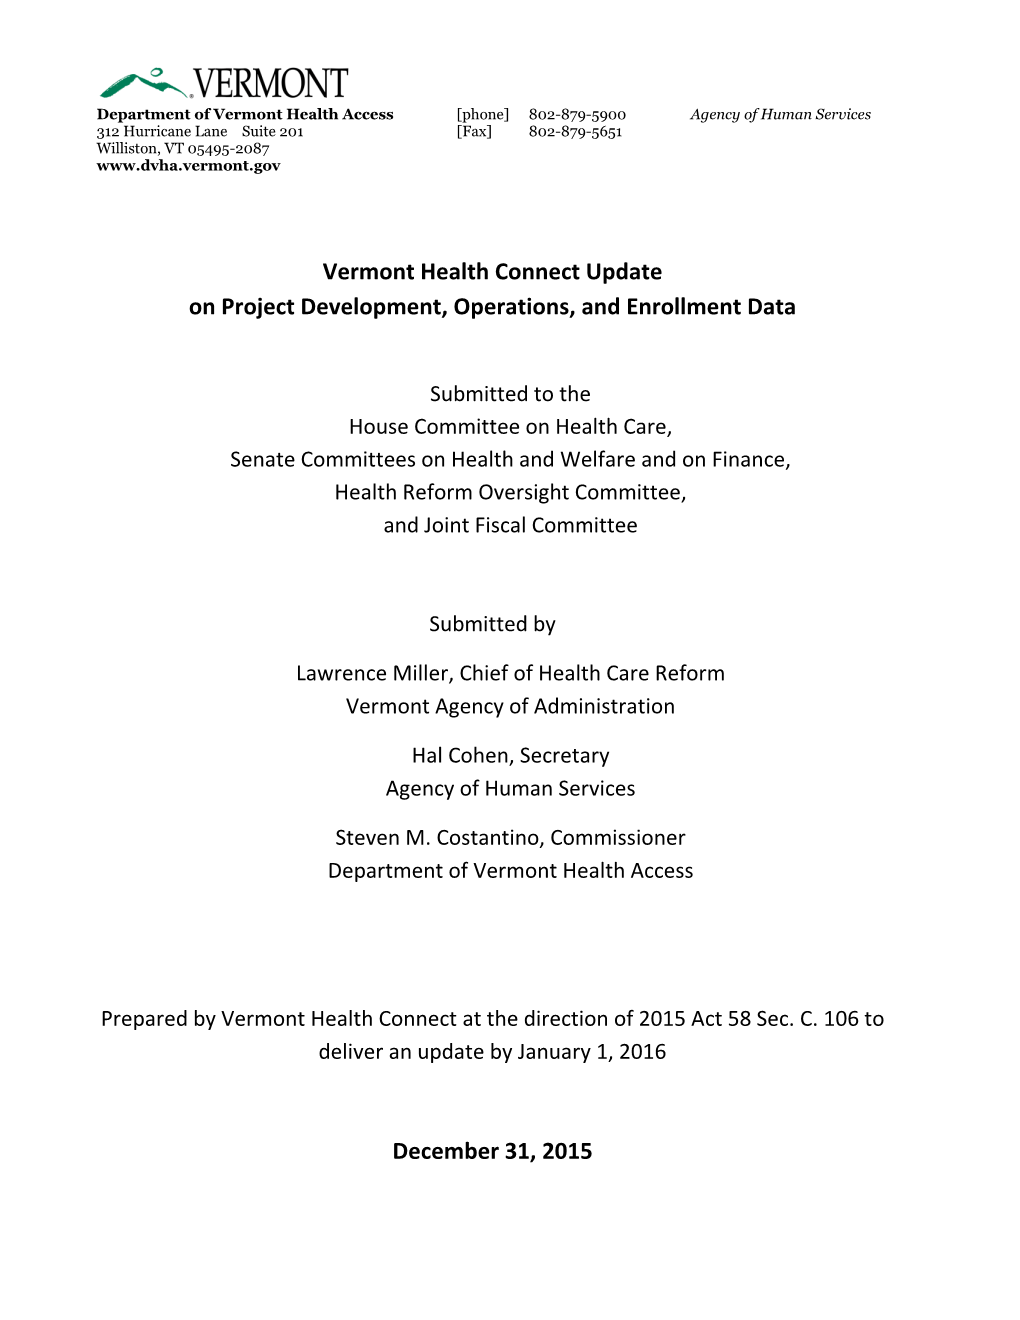 Vermont Health Connect Update on Project Development, Operations, and Enrollment Data